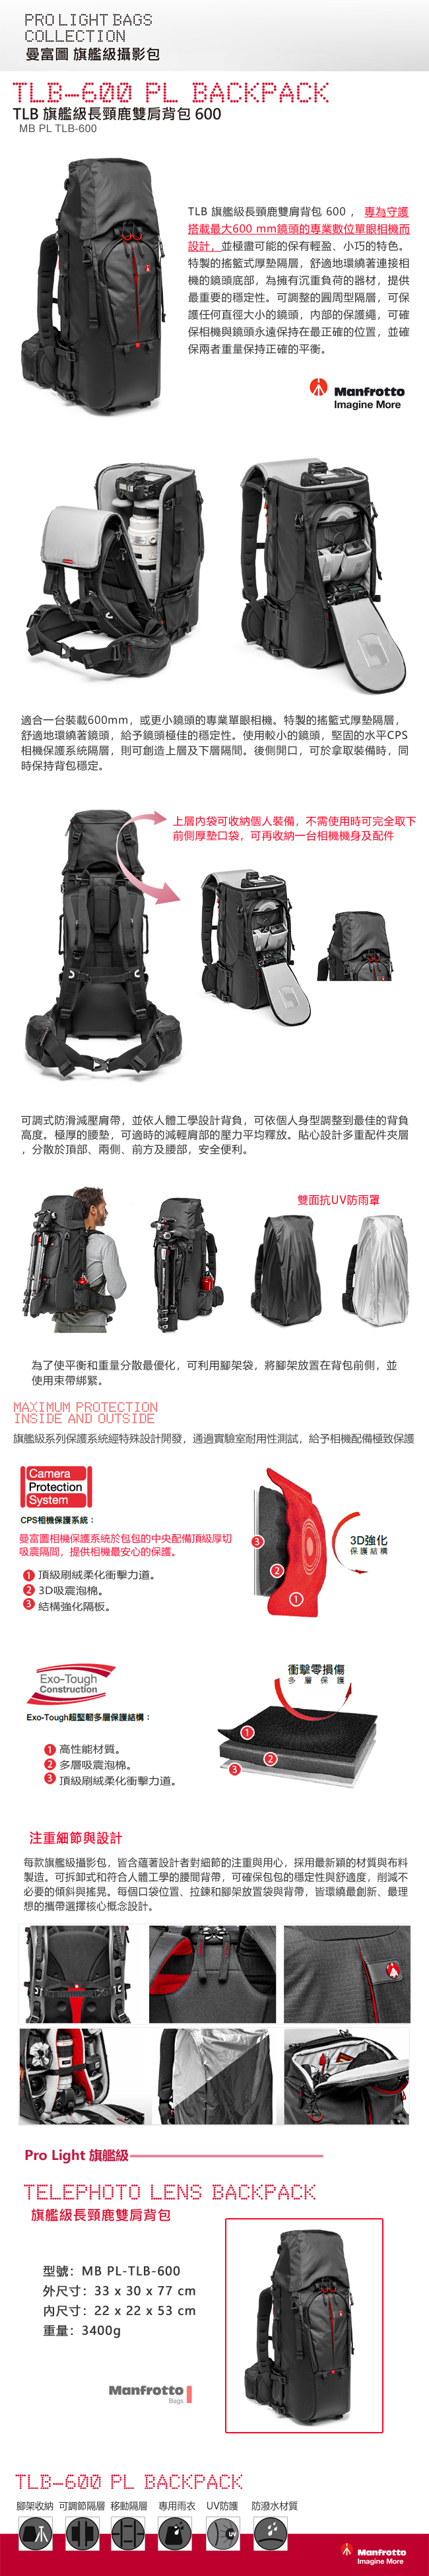 Manfrotto TLB-600 PL Backpack旗艦級長頸鹿雙肩背包 600